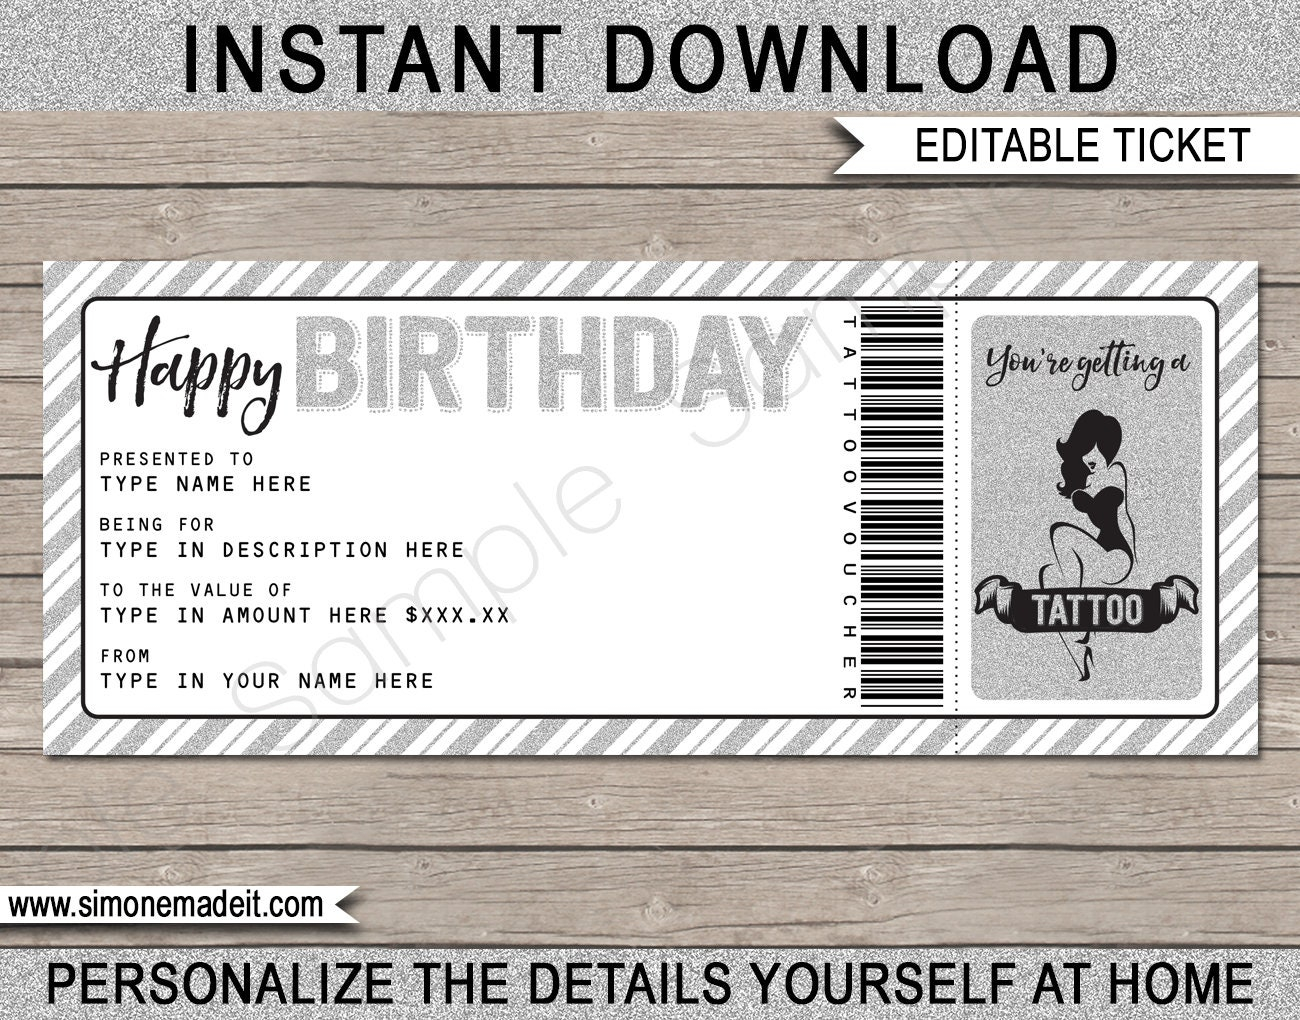 Tattoo Gift Voucher Template – Printable Birthday Gift Ticket Certificate  Card Coupon – Get Inked – EDITABLE TEXT DOWNLOAD – You Personalize With Tattoo Gift Certificate Template